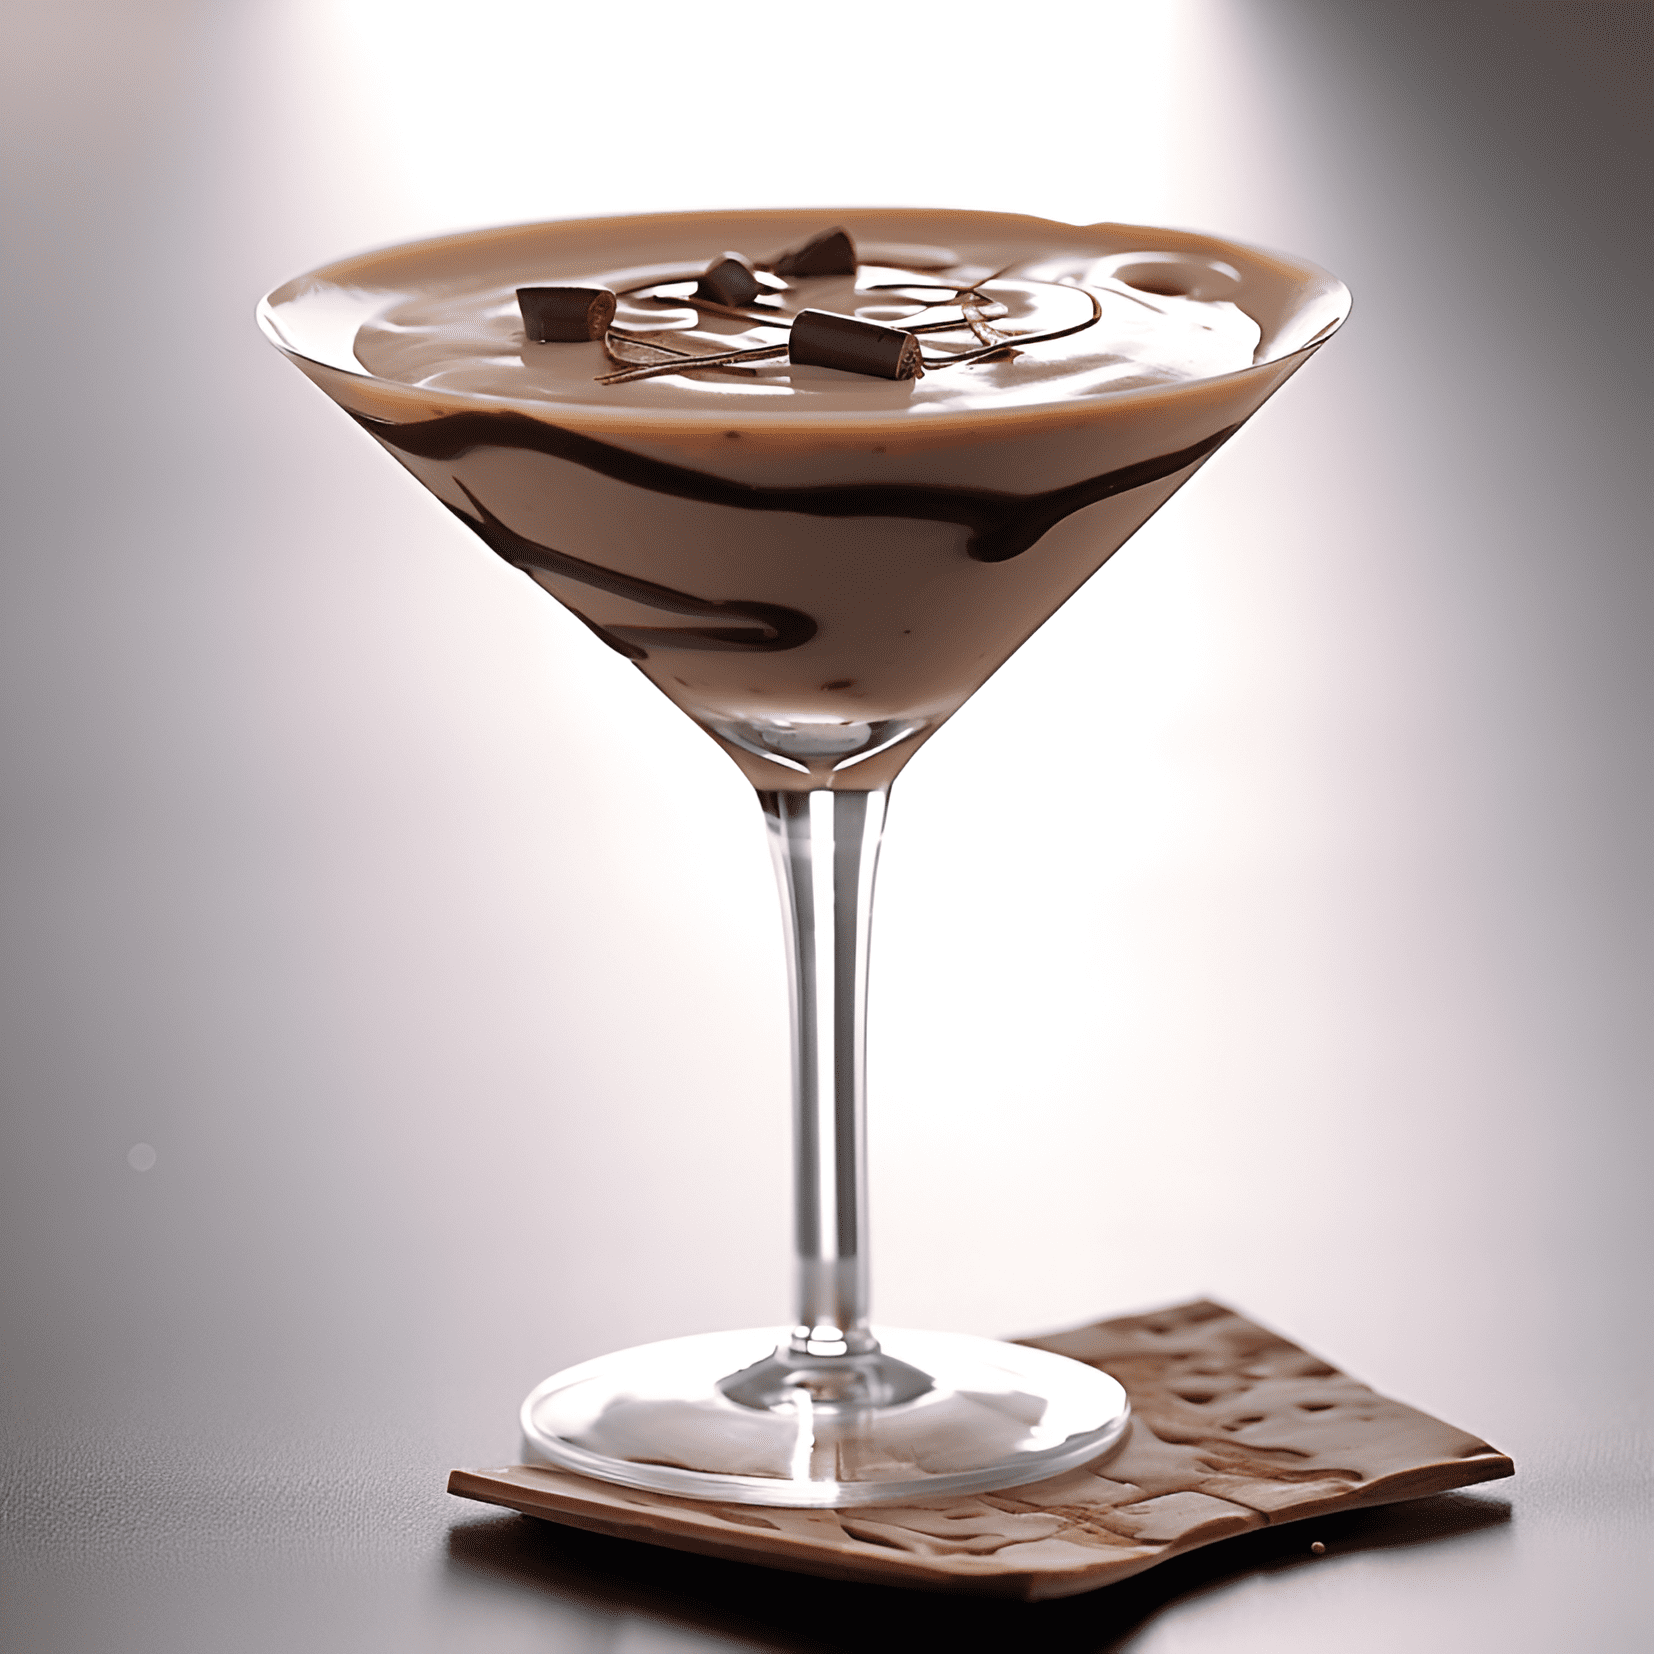 The Chocolate Martini is rich, creamy, and sweet, with a velvety chocolate flavor and a hint of vanilla. It has a smooth, luxurious mouthfeel and a slightly boozy kick from the vodka.